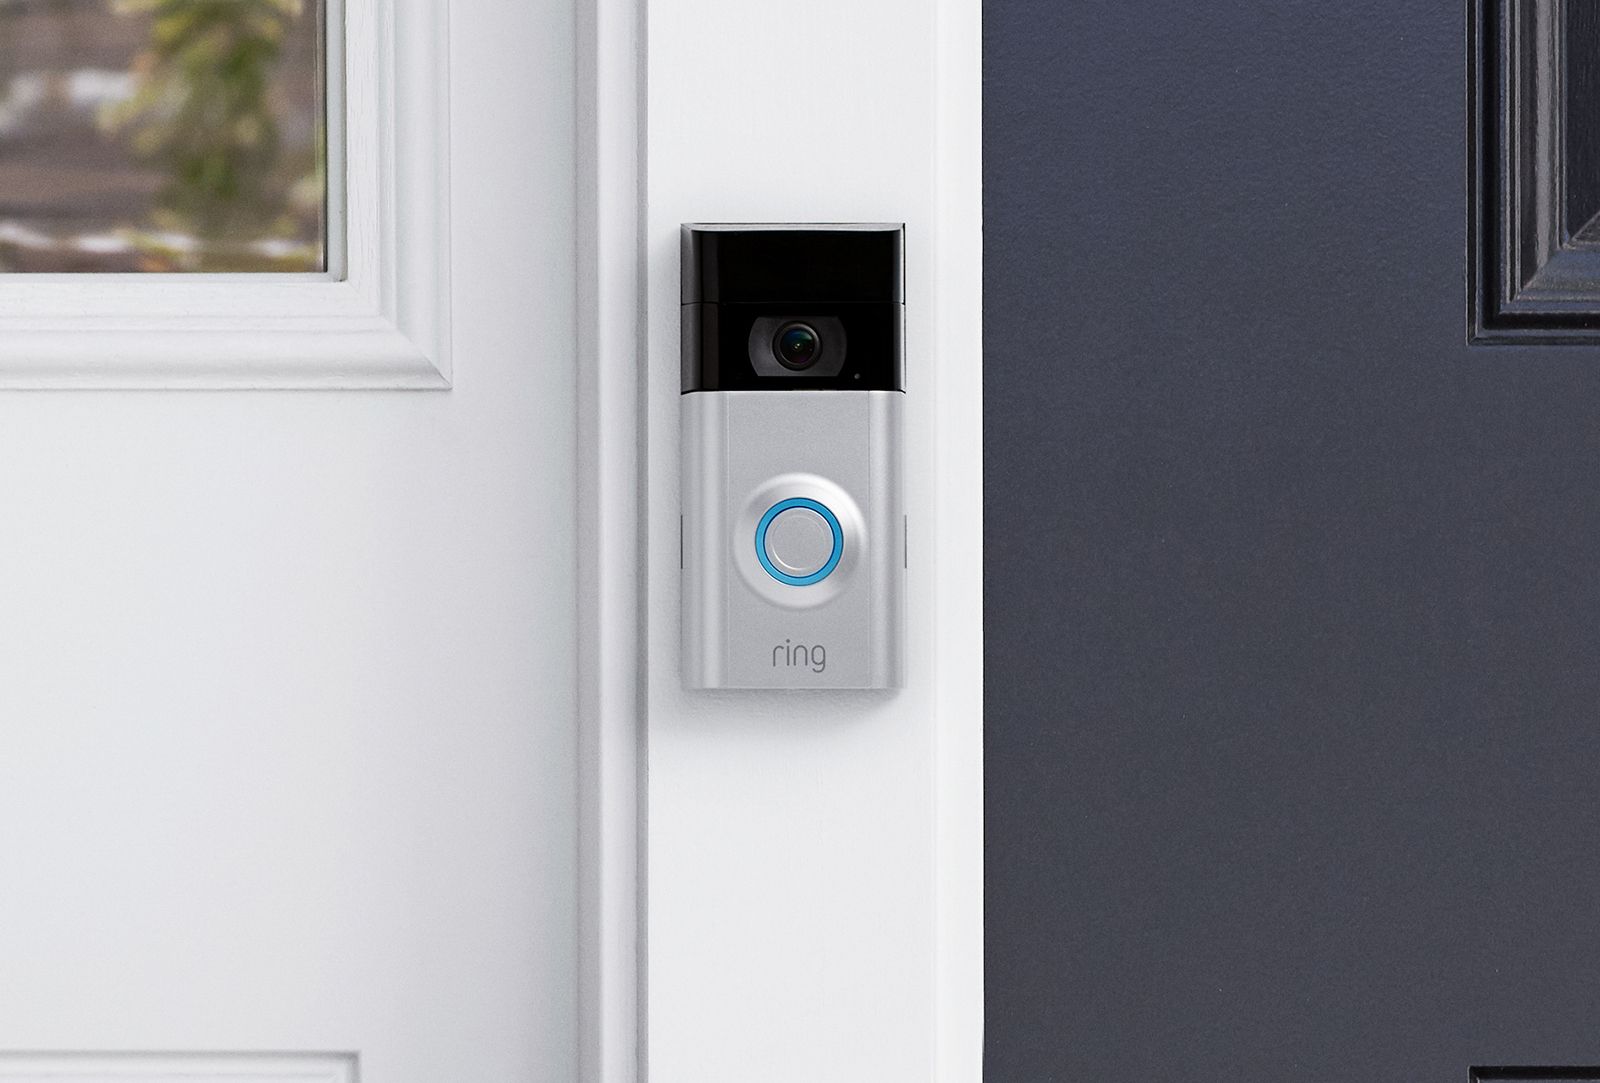 Save up to 40% on the excellent Ring Video Doorbell